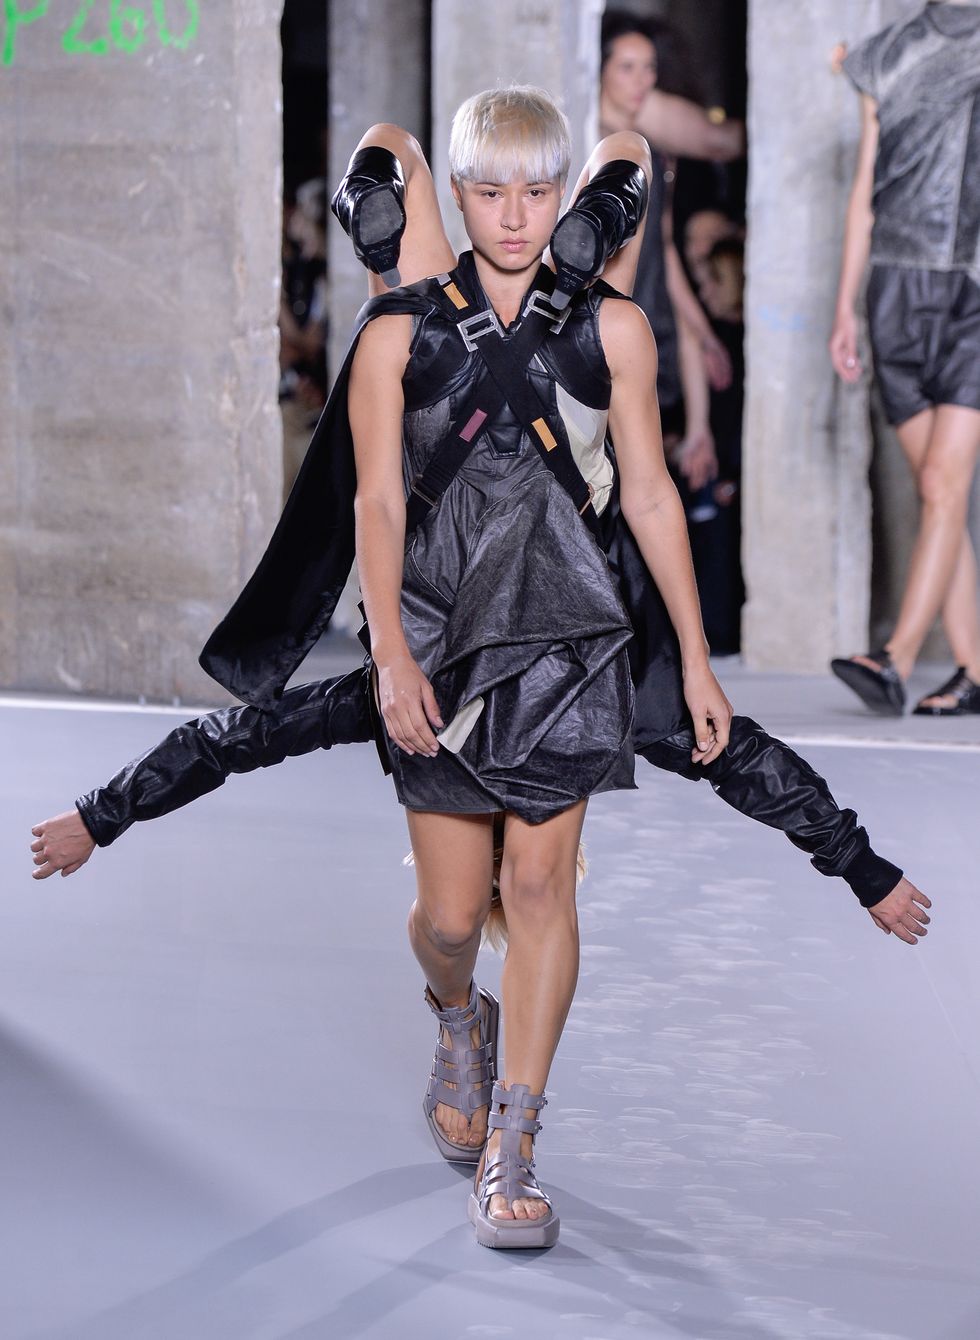 Rick Owens' Spring 2016 Fashion Week show was his most crazy yet